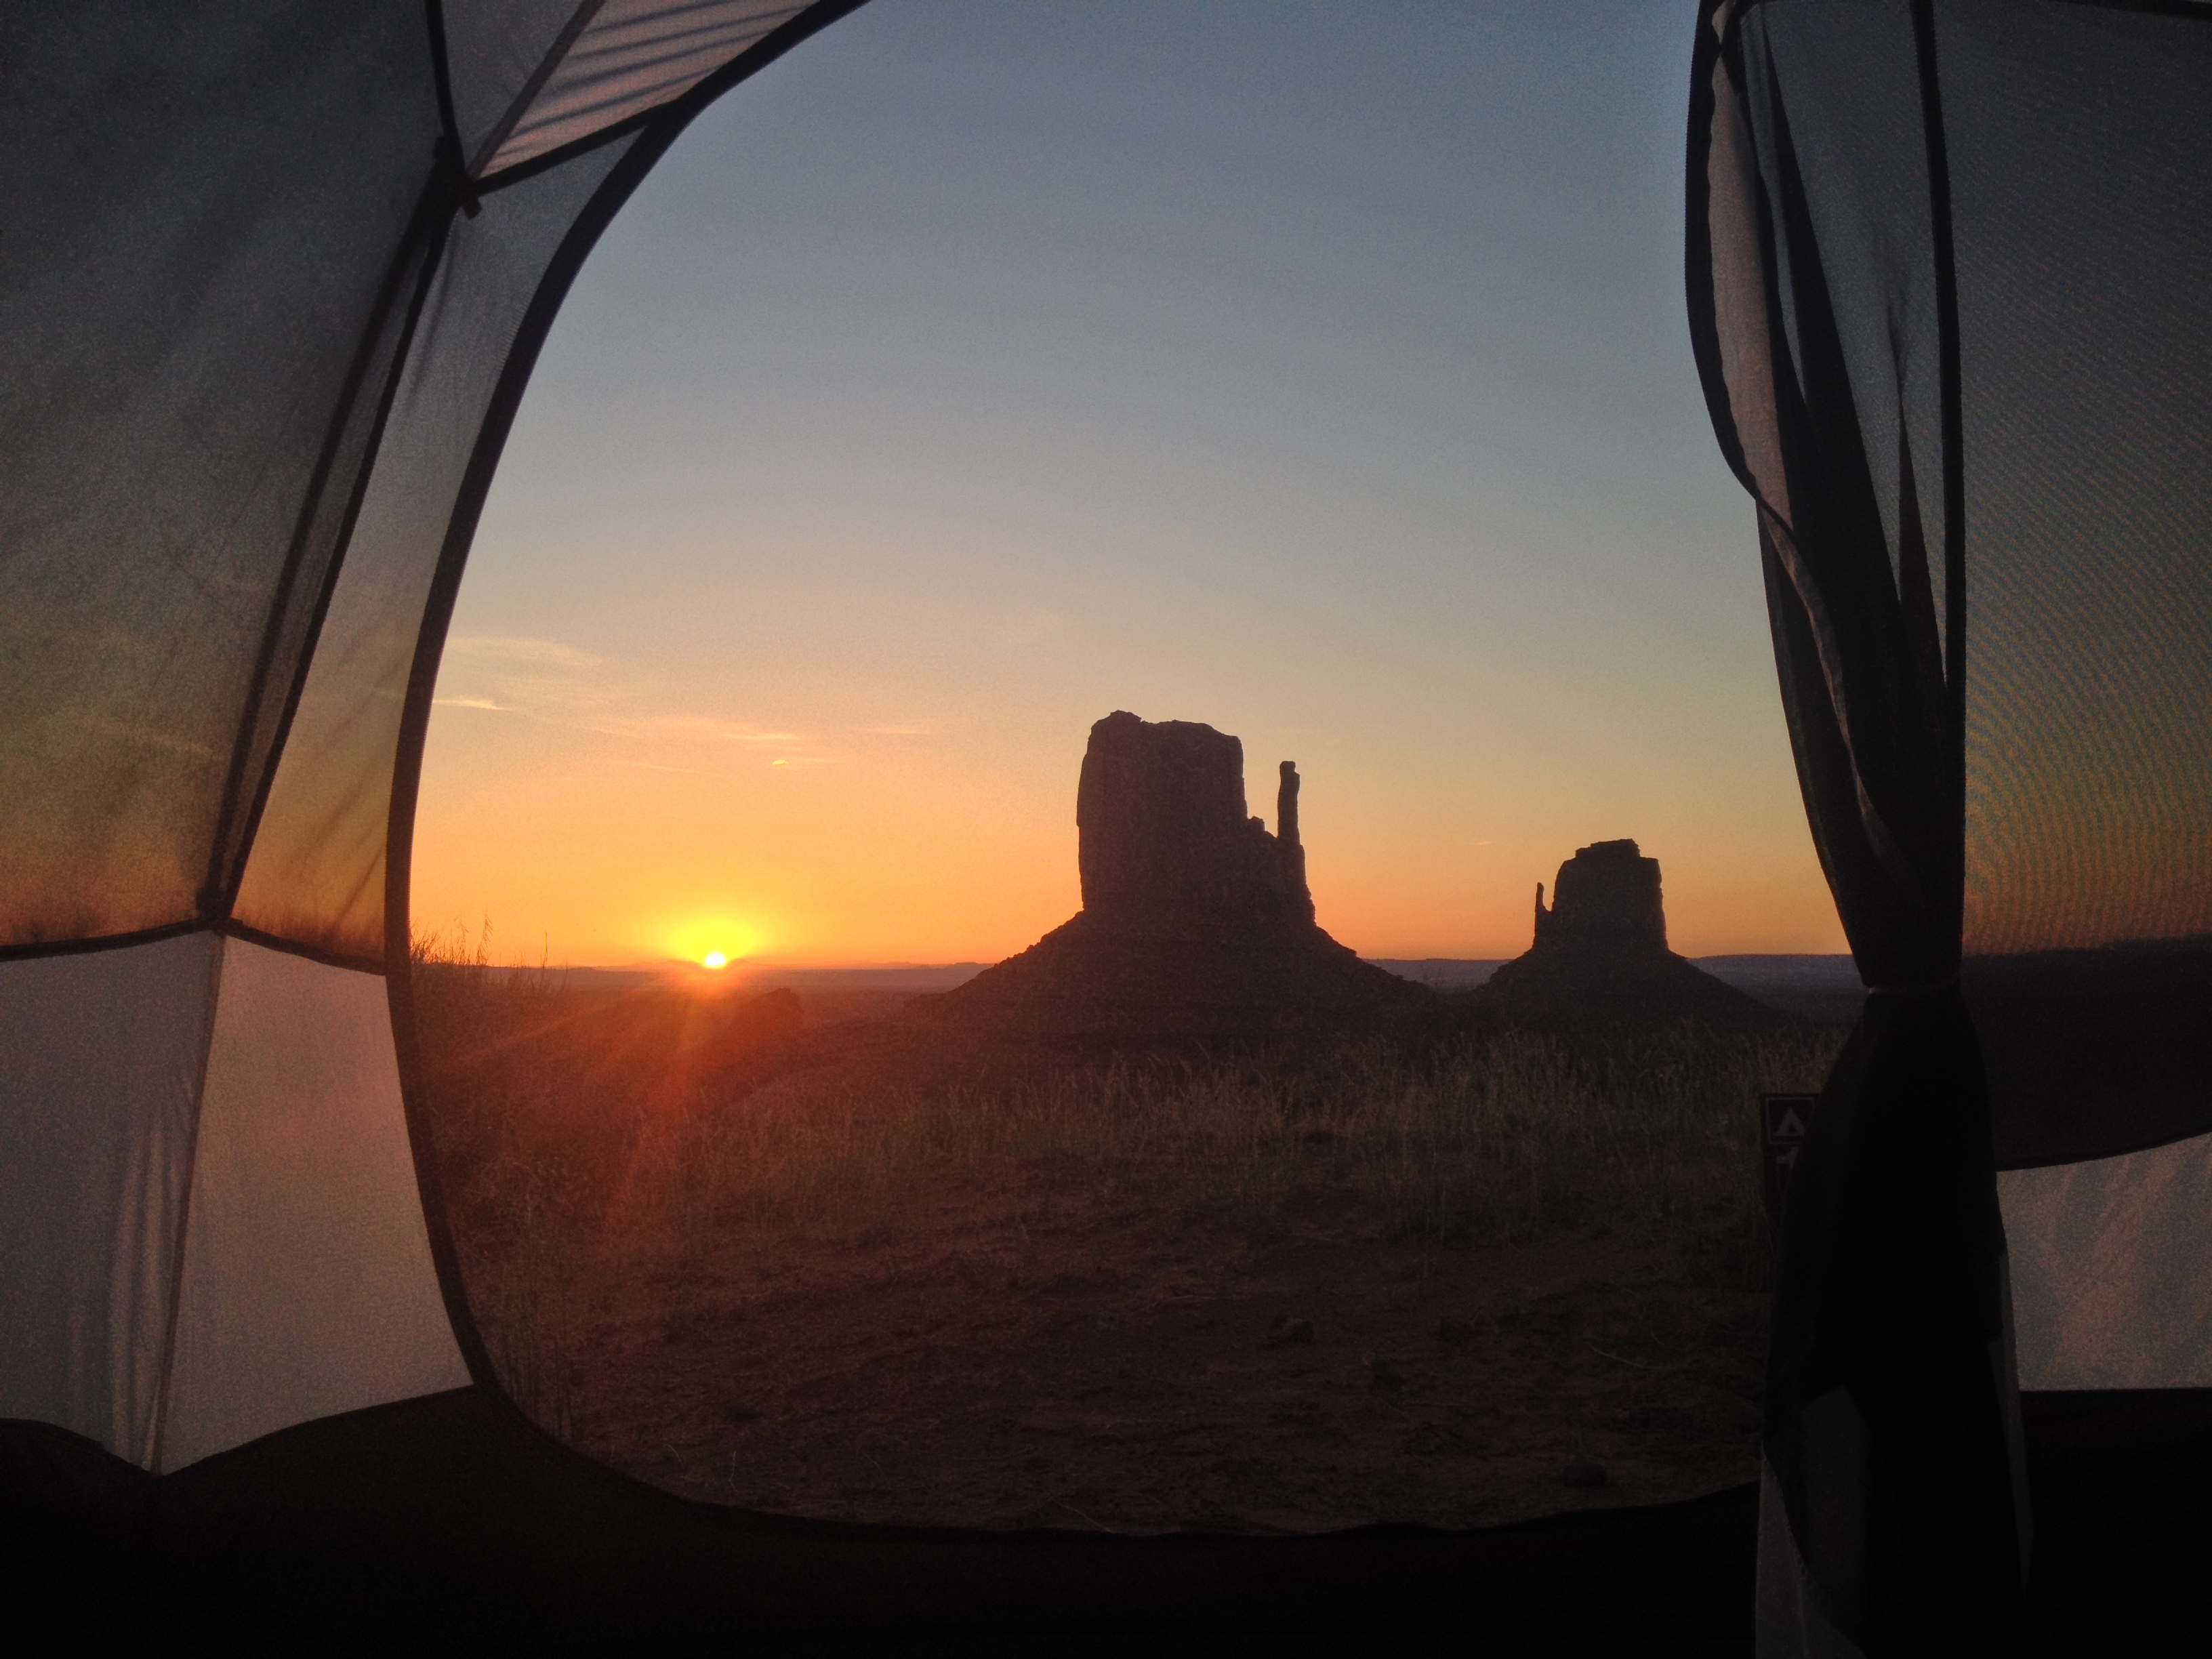 【Summer Tour】7-Day National Parks Camping Tour from Las Vegas: Zion, Bryce, Grand Canyon, Death Valley, Yosemite National Park and Monument Valley | 14 Pax Small Group | Park Entries Included | Breakfasts and lunches Included